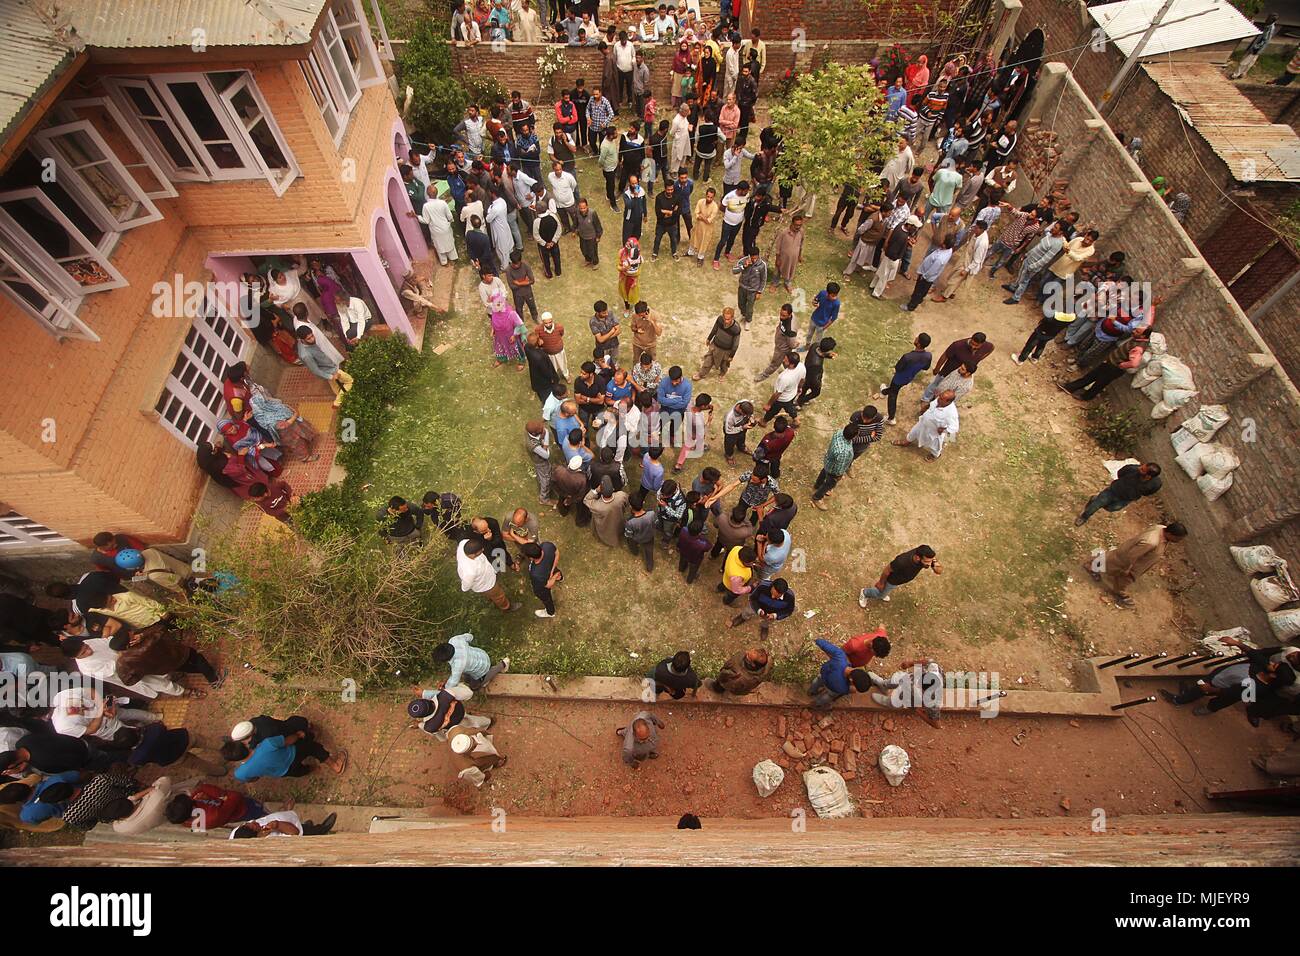 May 5, 2018 - Srinagar, Jammu and Kashmir, India - People gather infront of the house which was blasted by Indian security forces during a gun-battle in Srinagar the summer of Indian controlled Kashmir on May 05, 2018. Four people including a protester and three rebels were killed during a gun-battle between rebels and Indian forces in Chattabal area of Srinagar. Massive clashes erupt across Srinagar after the news about the trapping of rebels and killing of protester spread across the city. Police fired teargas canisters, pellets, stun grenades and rubber coated bullets to disperse the angry Stock Photo